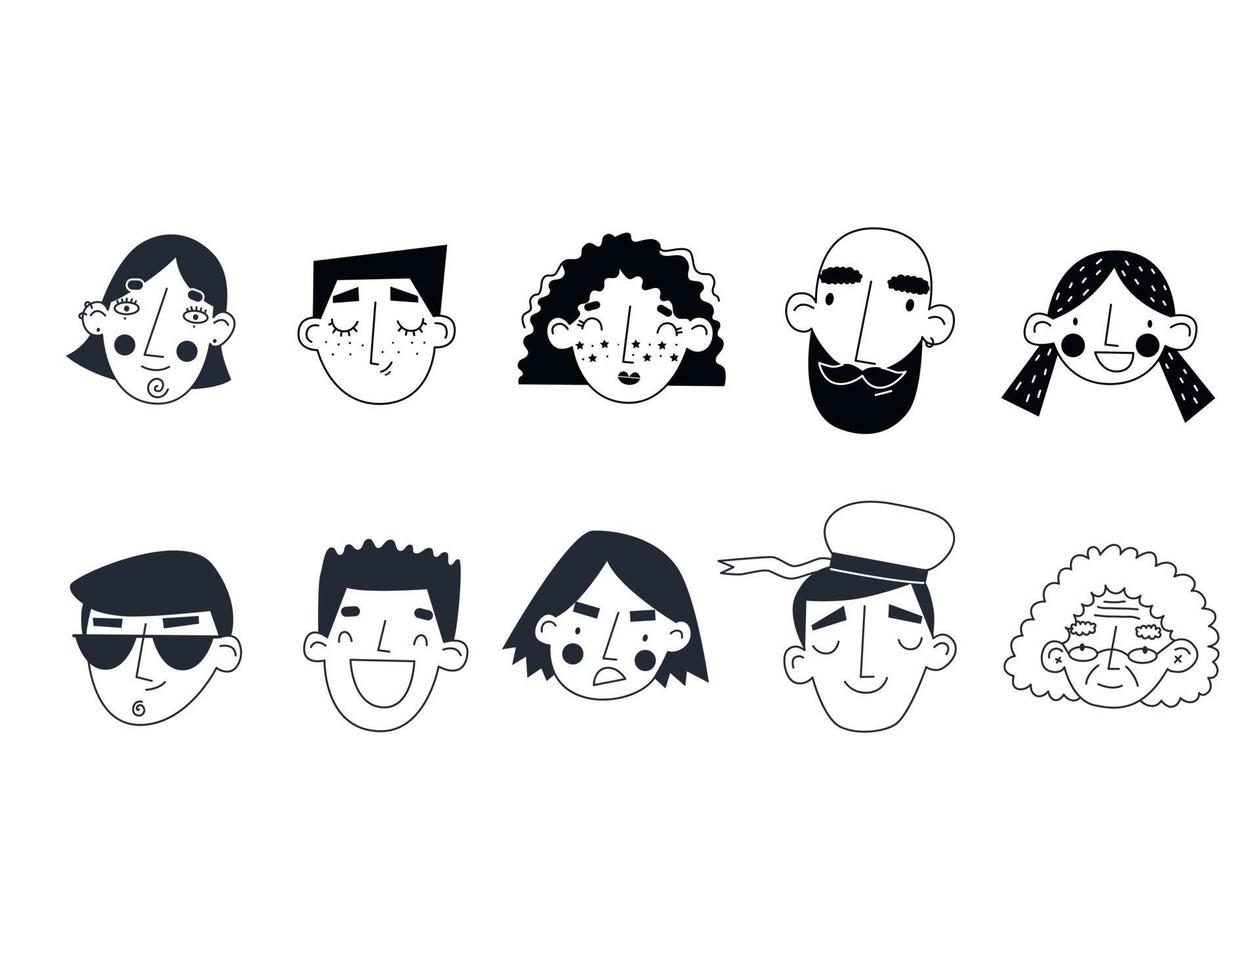 Doodle faces. Old and young age. Different emotions. Vector illustration.